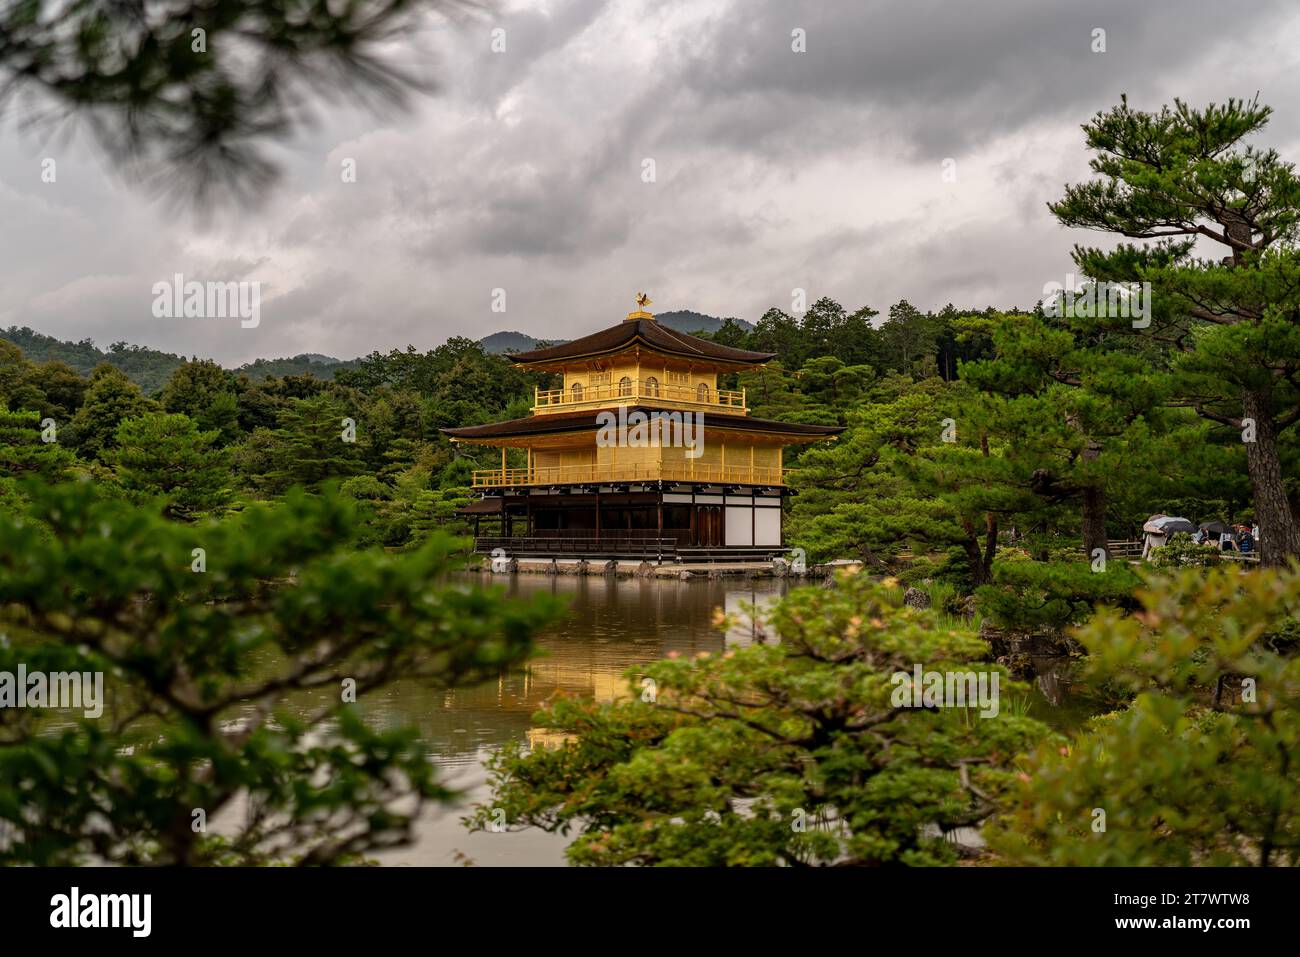 Kinkakuji reflects on a tranquil pond, surrounded by lush greenery under a cloudy sky. Stock Photo